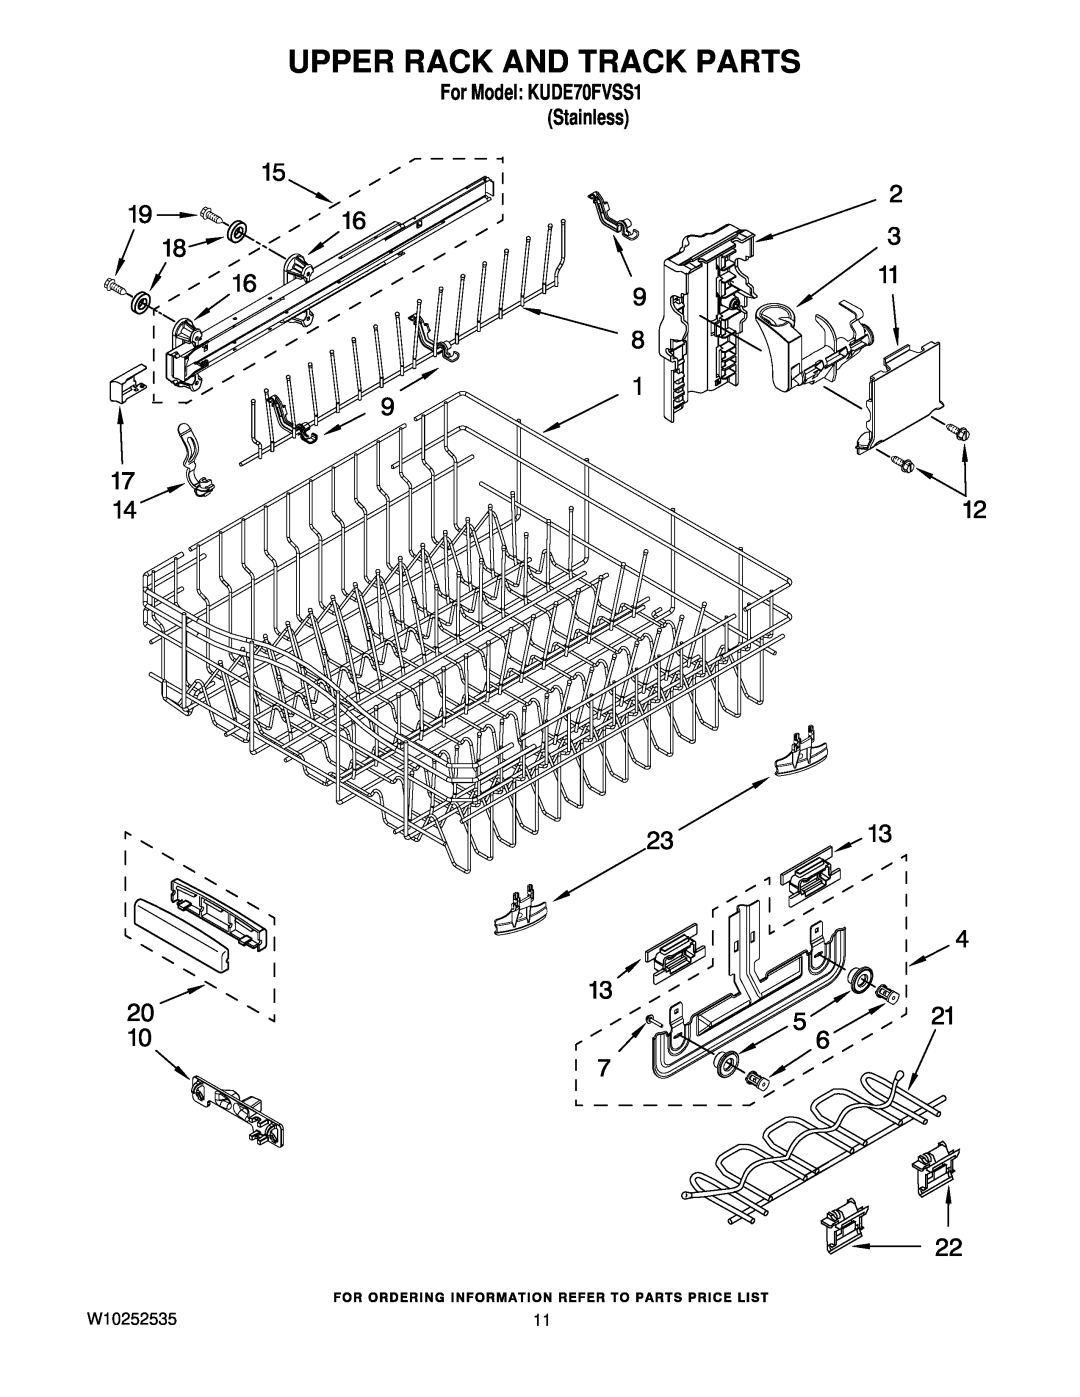 KitchenAid manual Upper Rack And Track Parts, W10252535, For Model KUDE70FVSS1 Stainless 